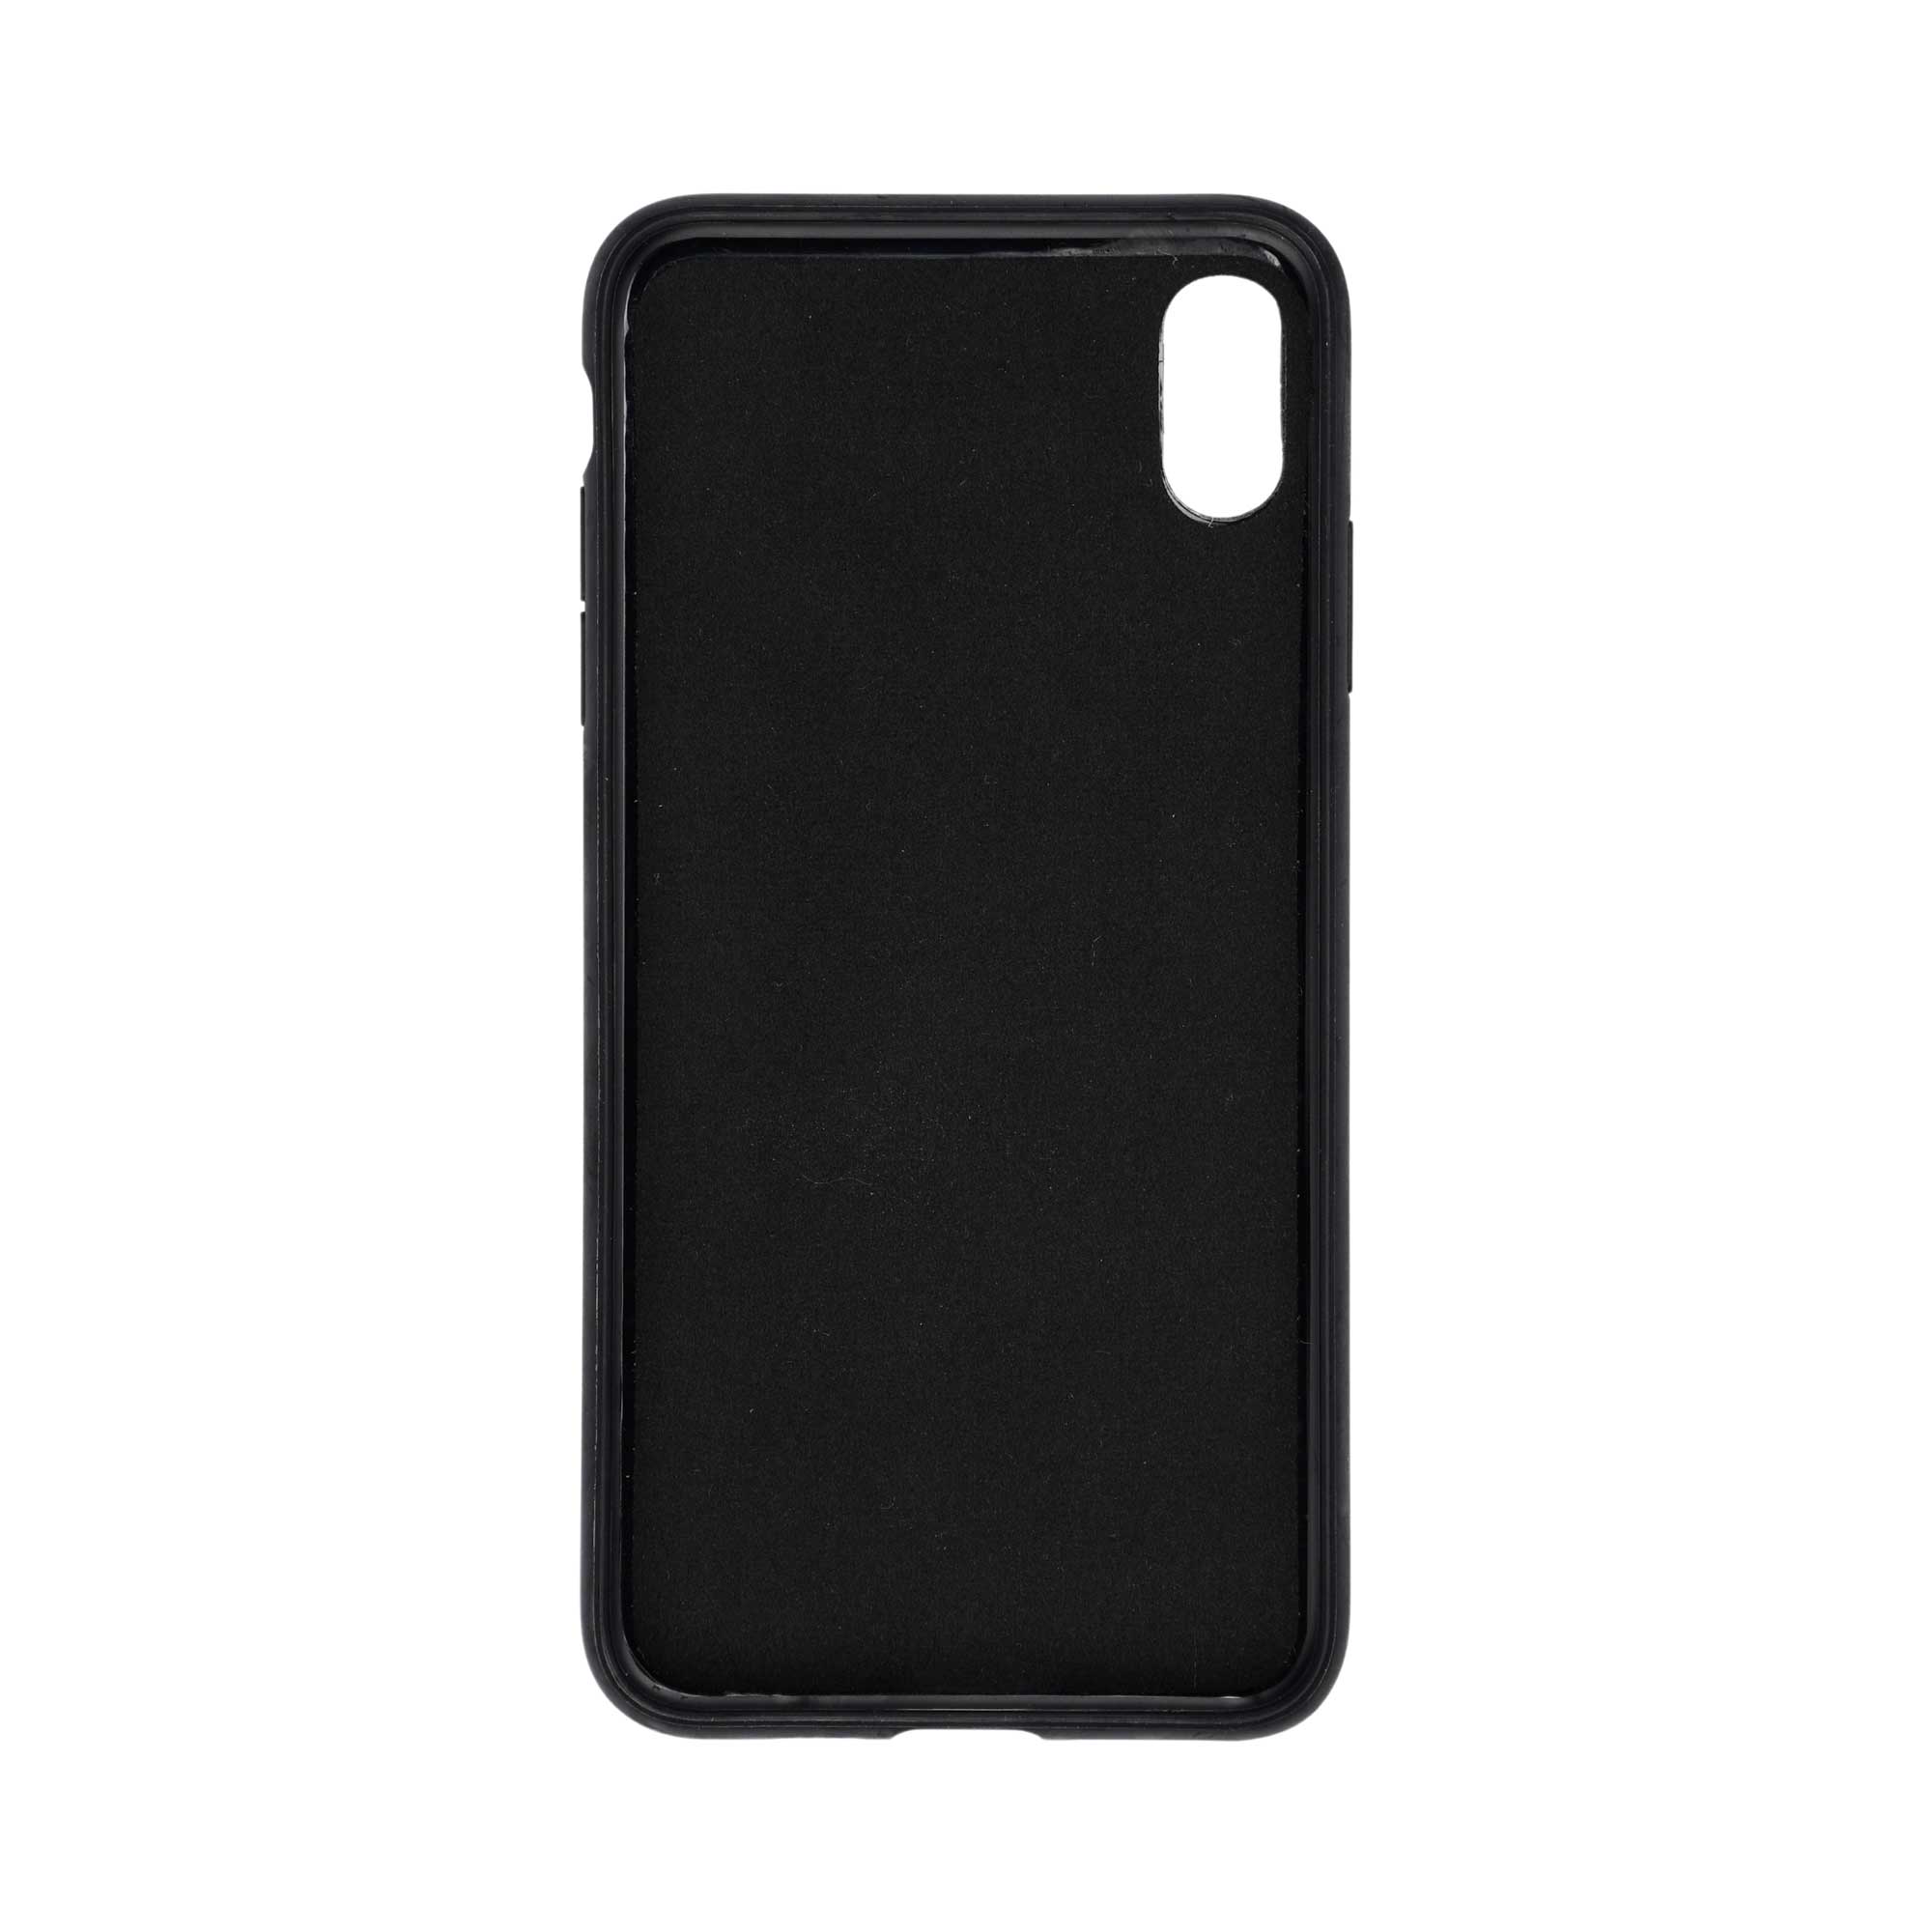 Falta Kickstand Cover For iPhone X/XR/XS Max